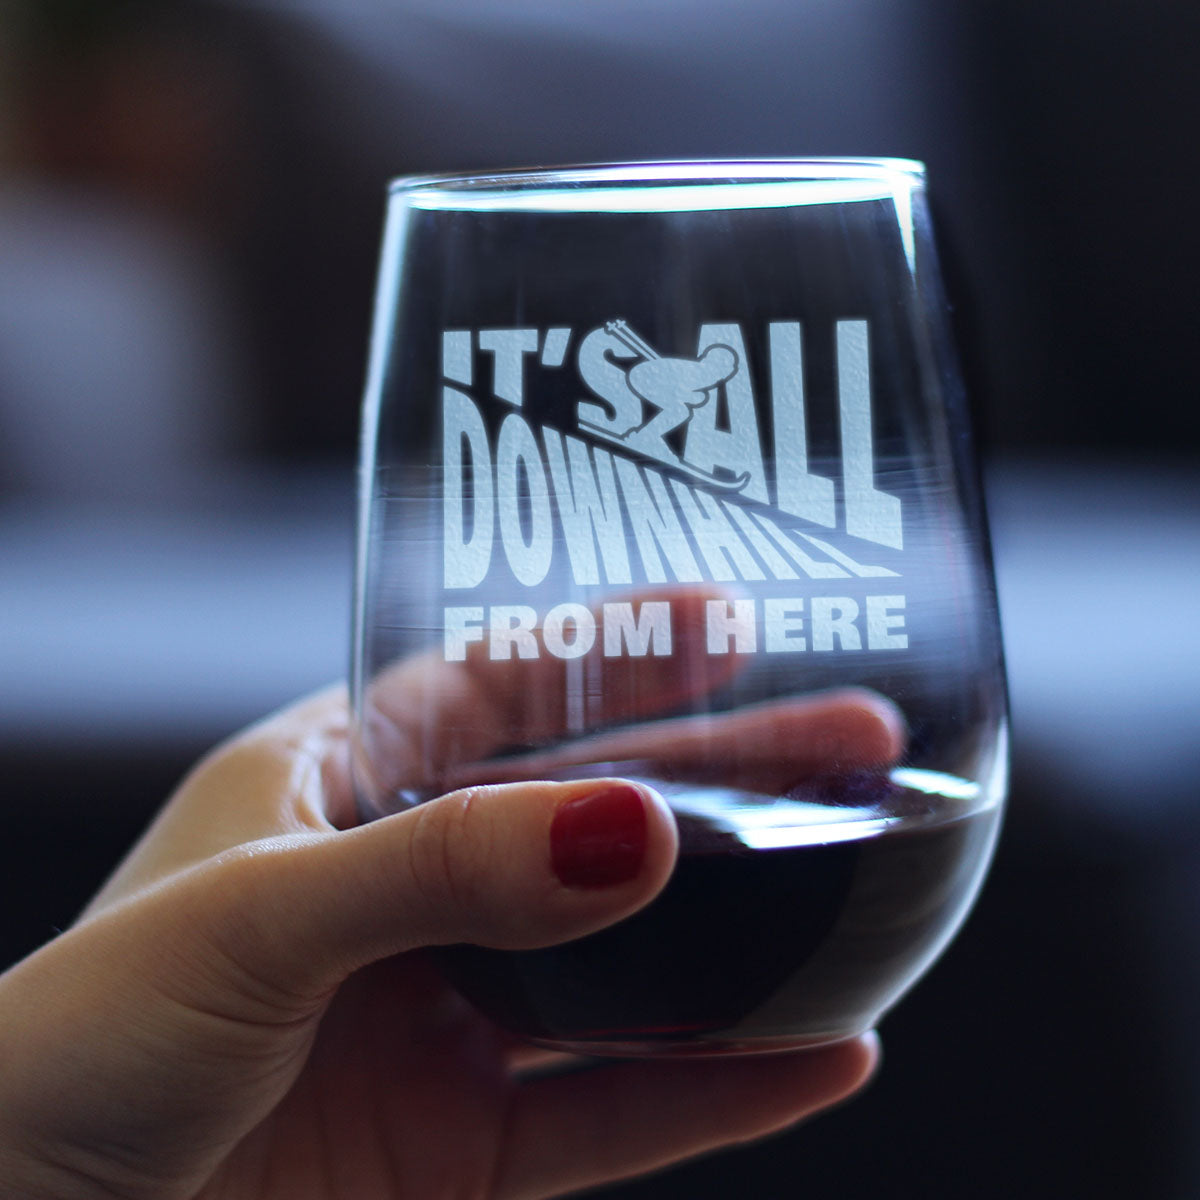 Stemless Wineglasses for Everything Are Where It's At